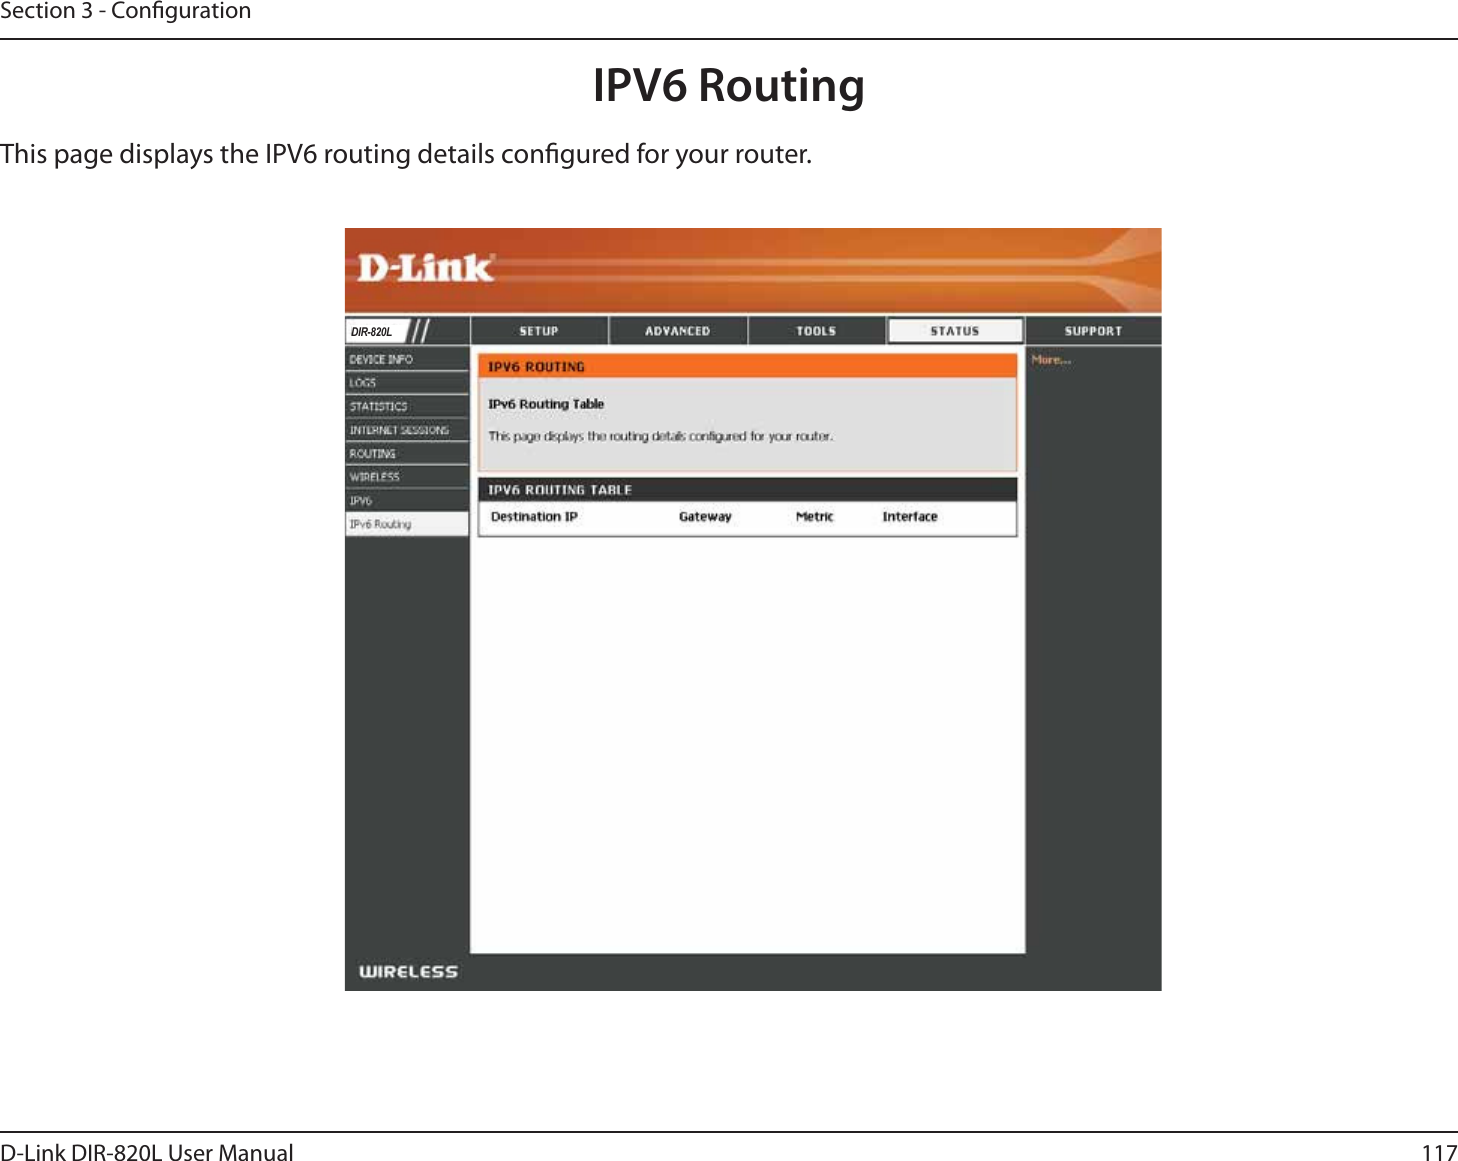 117D-Link DIR-820L User ManualSection 3 - CongurationIPV6 RoutingThis page displays the IPV6 routing details congured for your router. &apos;,5/